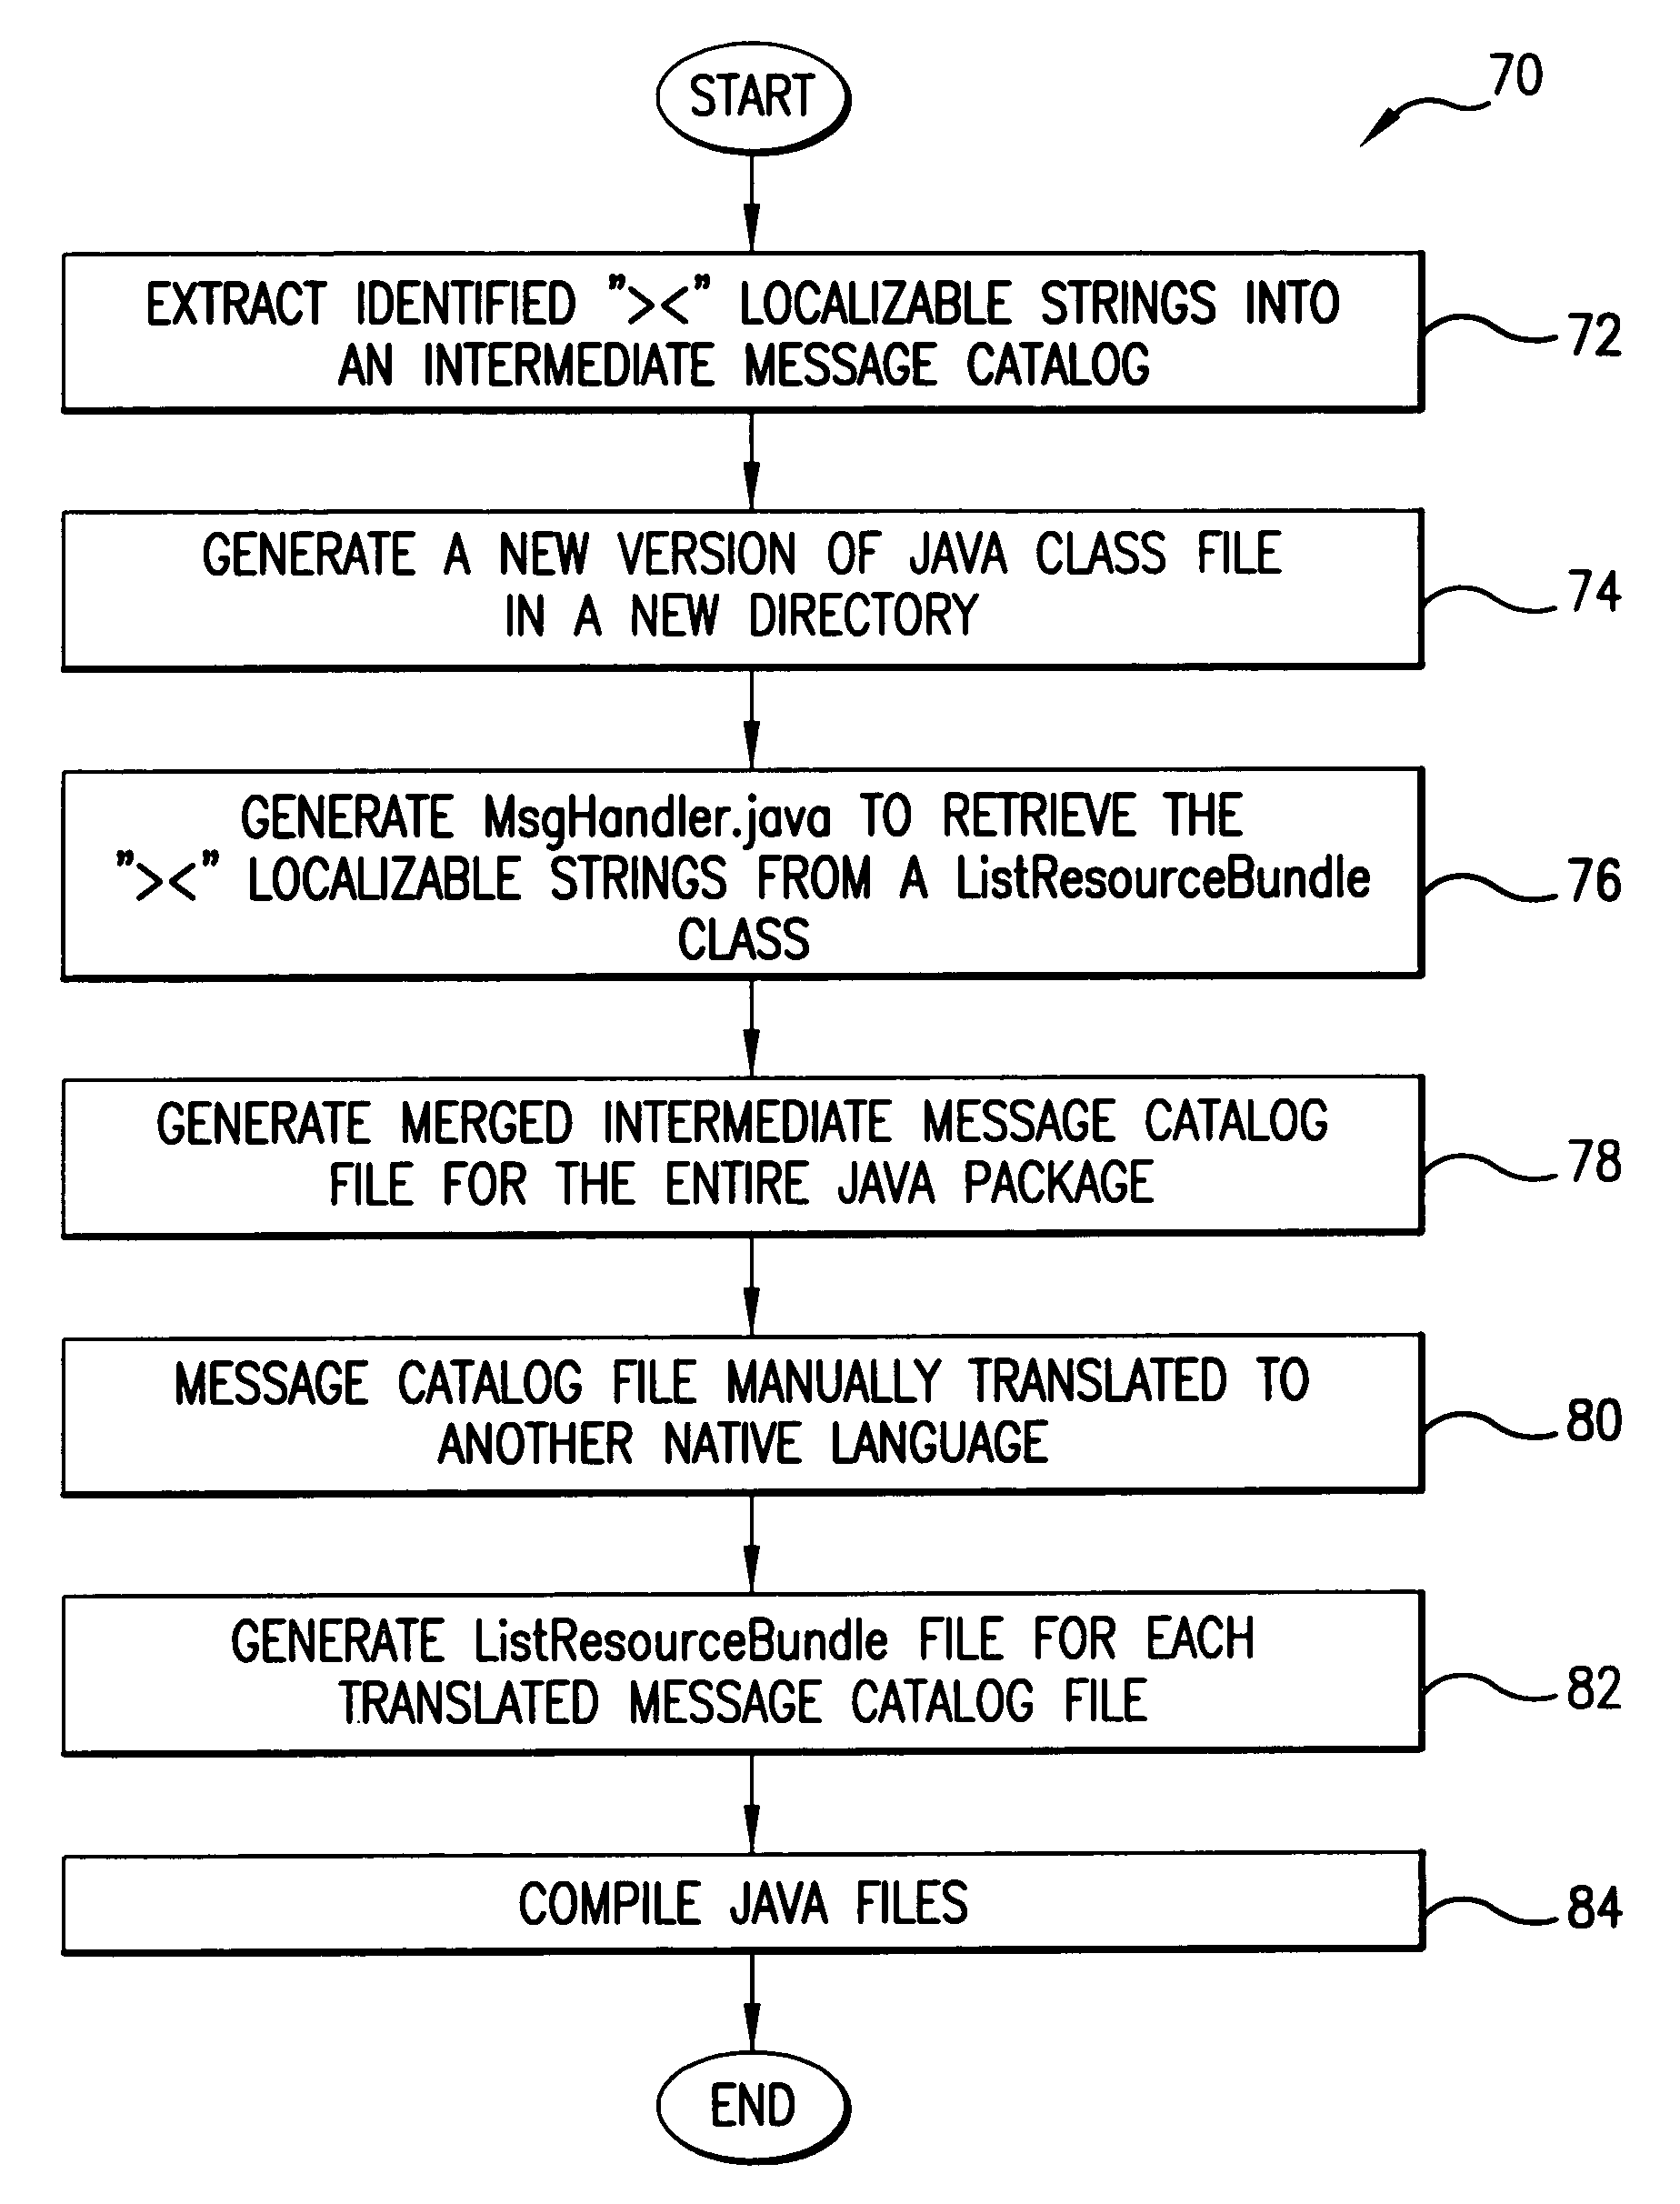 Method for generating localizable message catalogs for Java-based applications